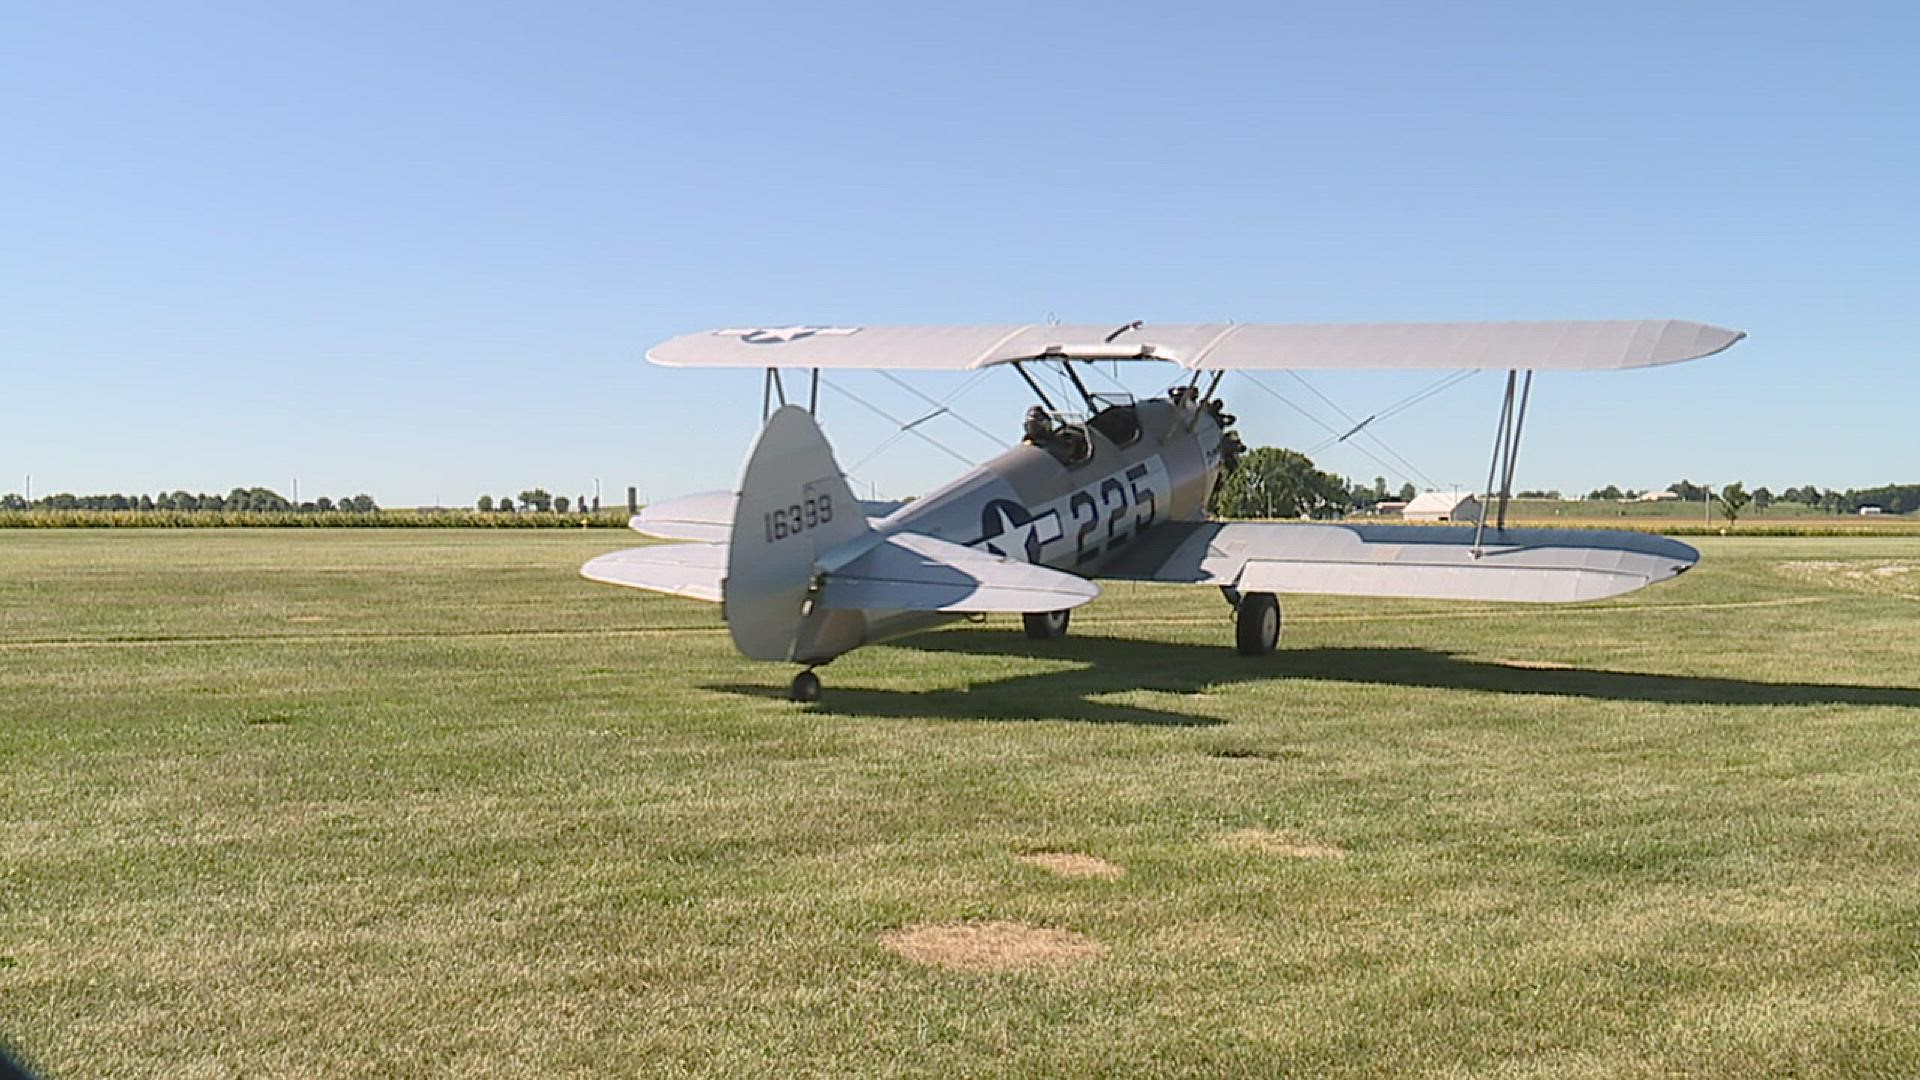 After nine years restoring a WWII plane, a Geneseo pilot is ready for take-off.